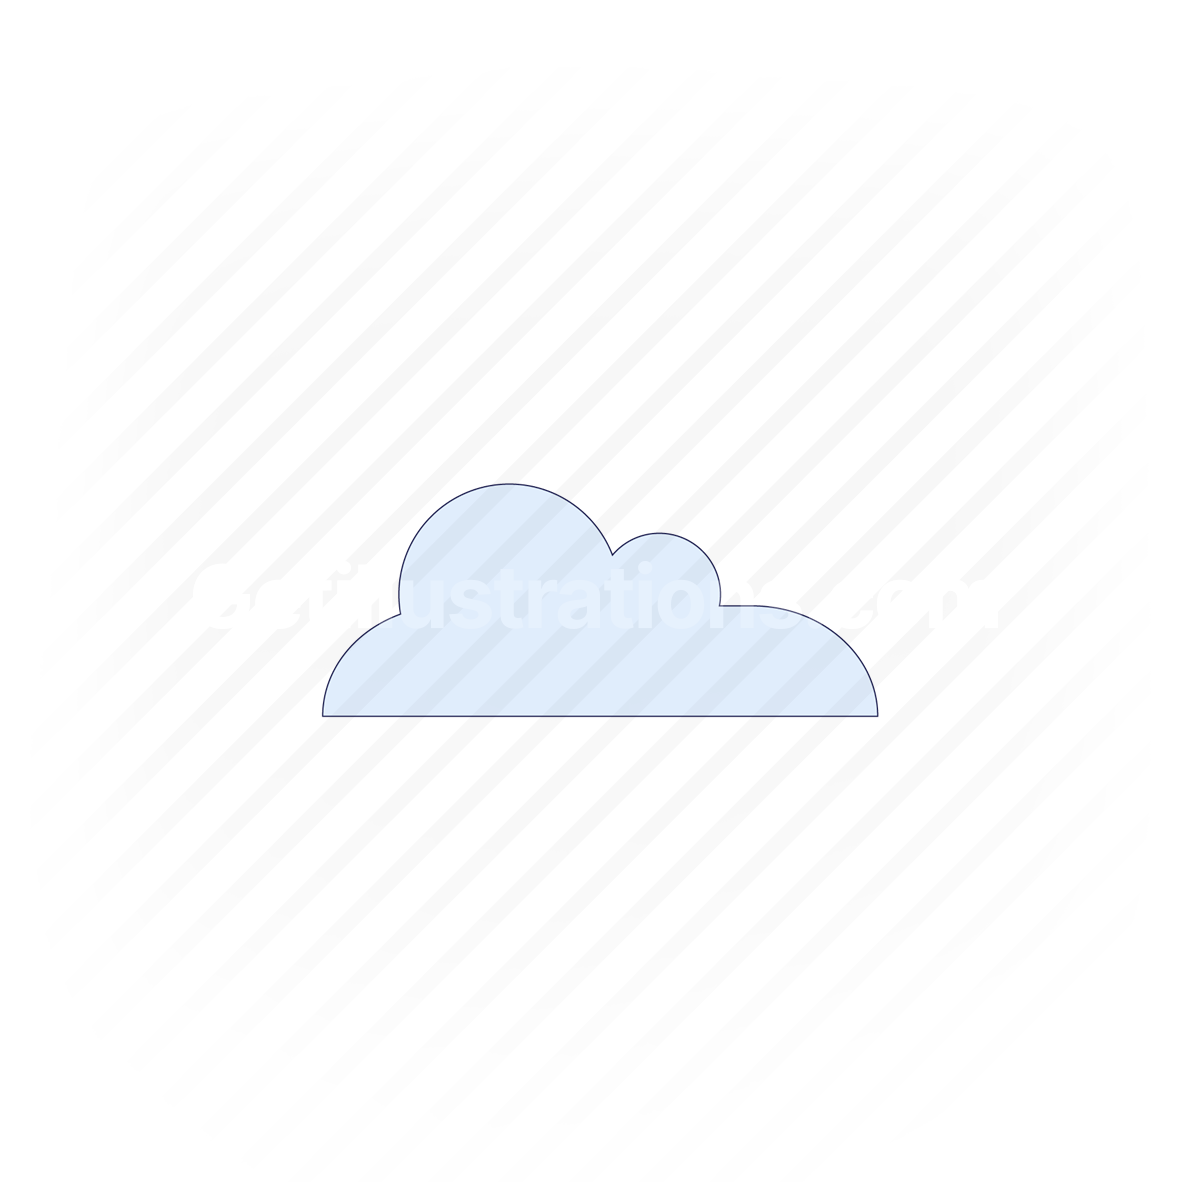 weather, cloudy, cloud, forecast, storage